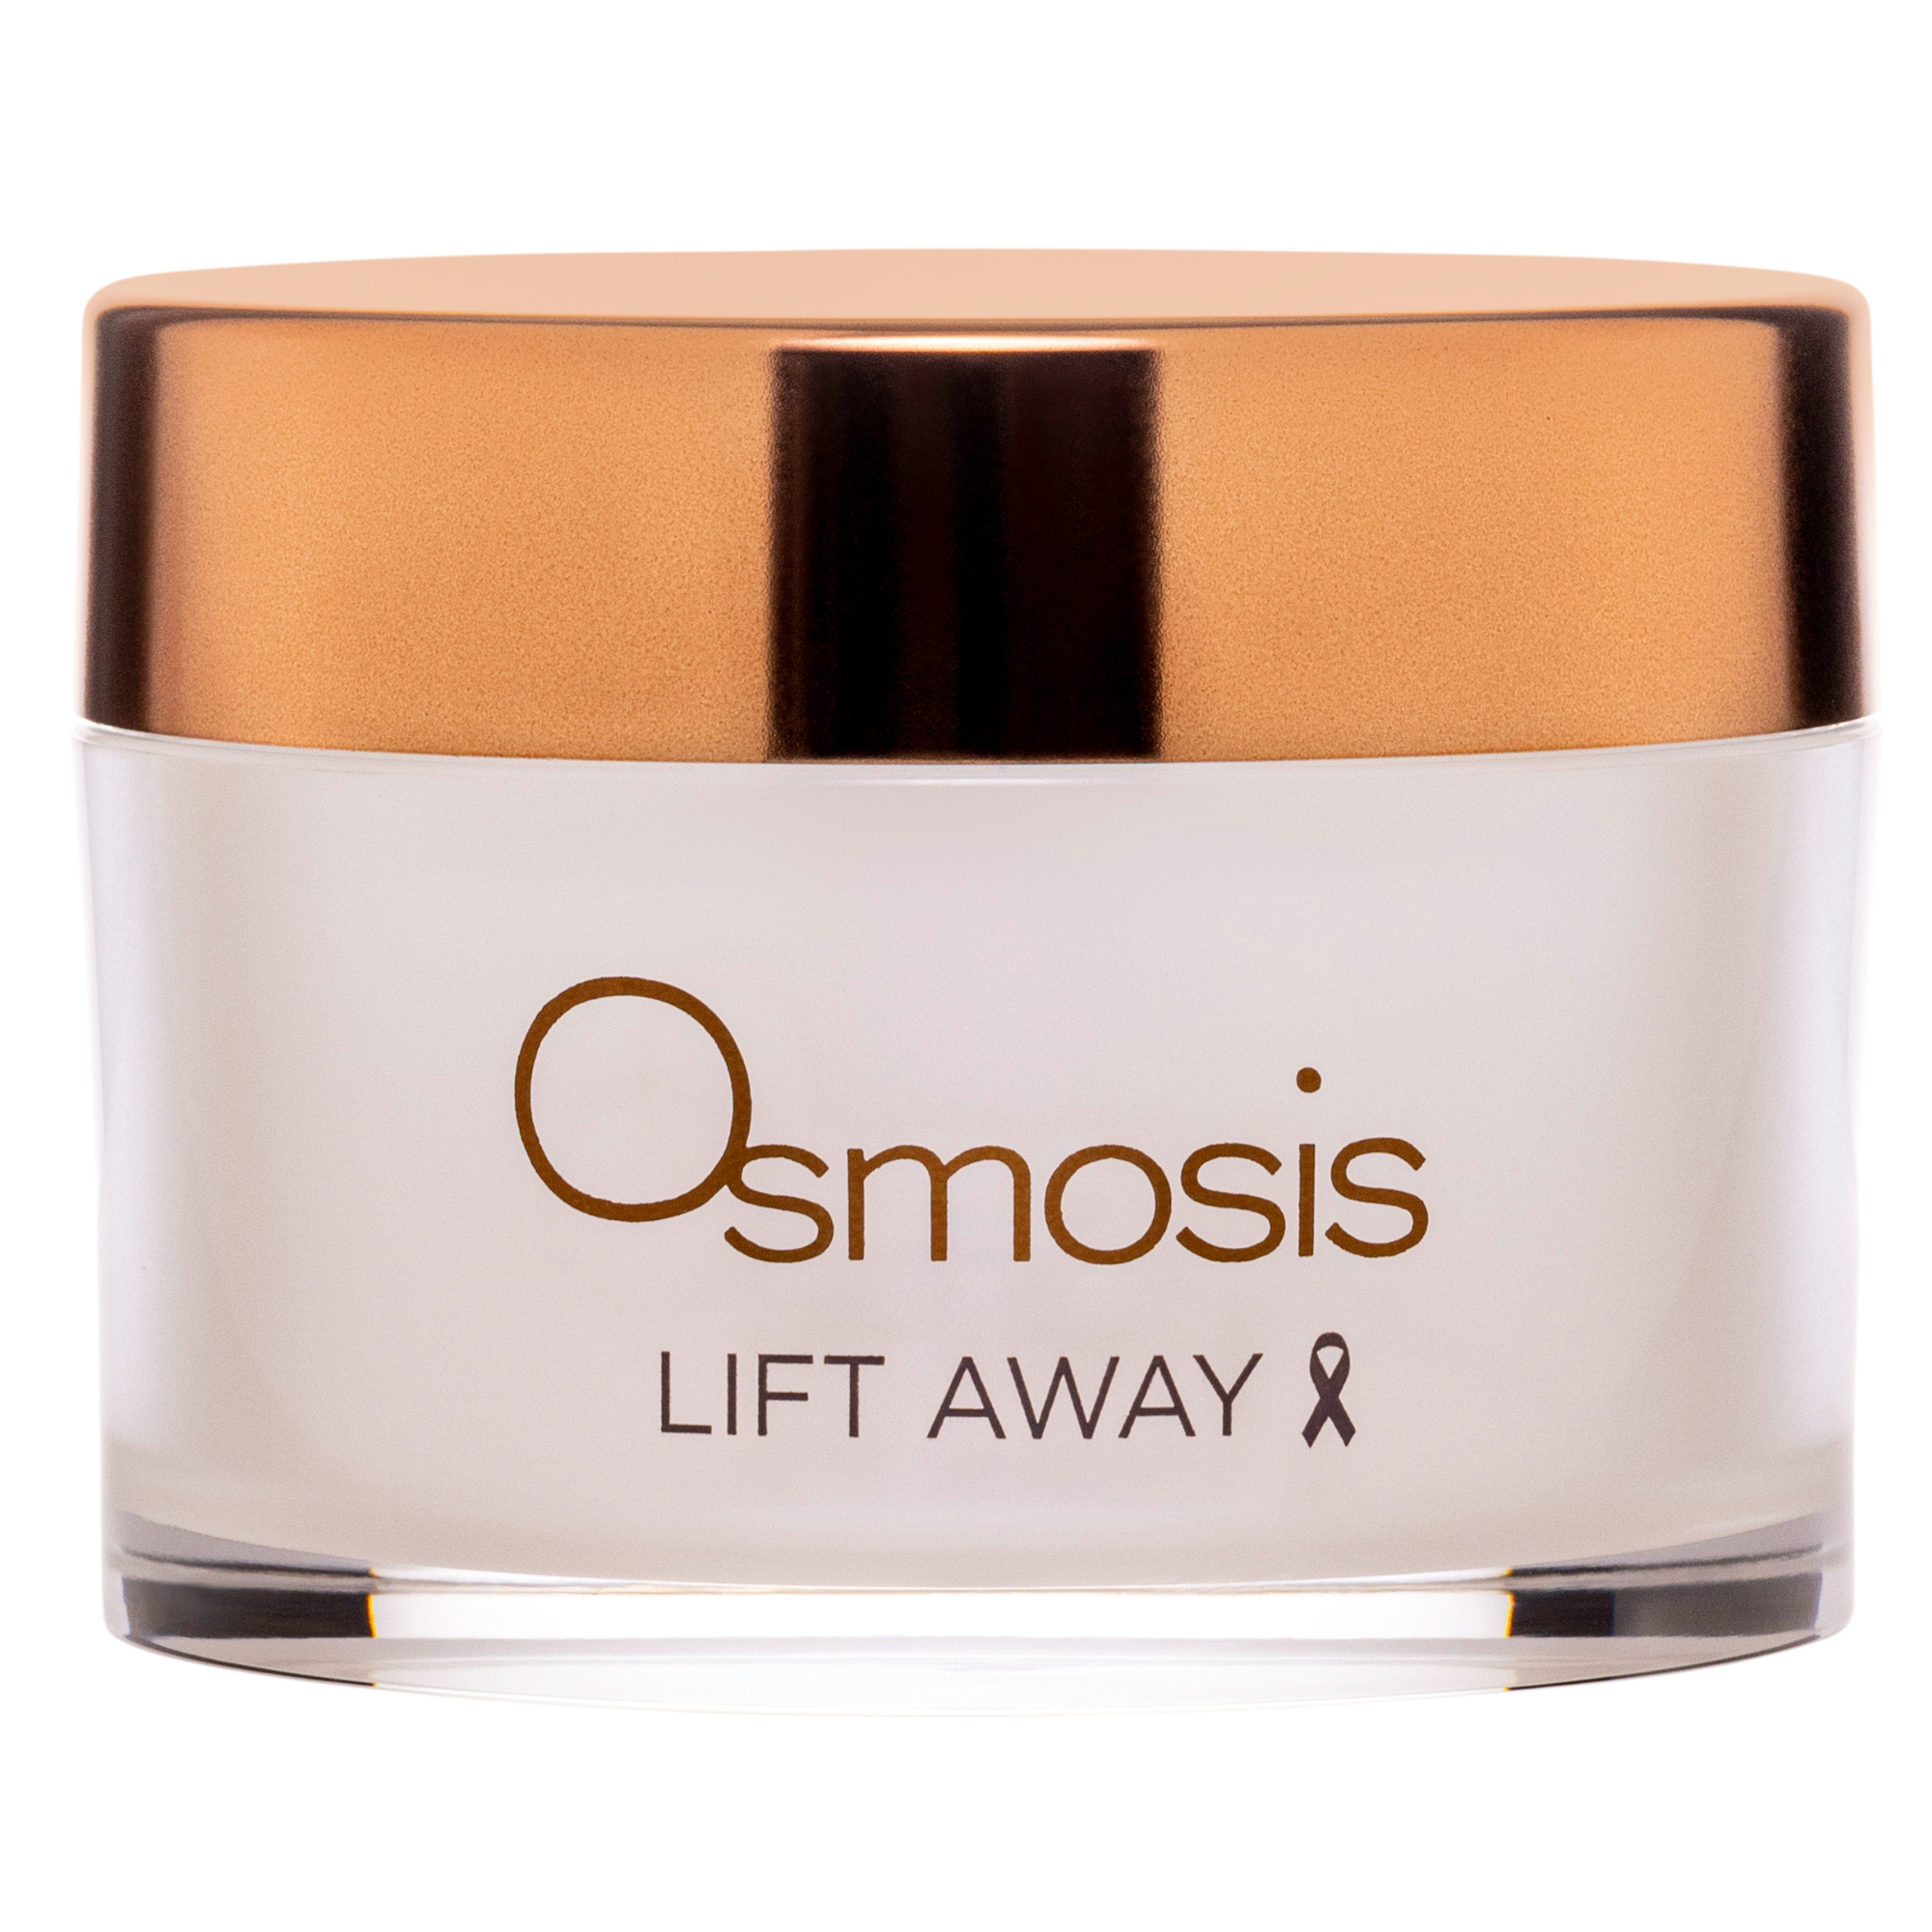 Osmosis Skincare Lift Away Cleansing Balm by Osmosis